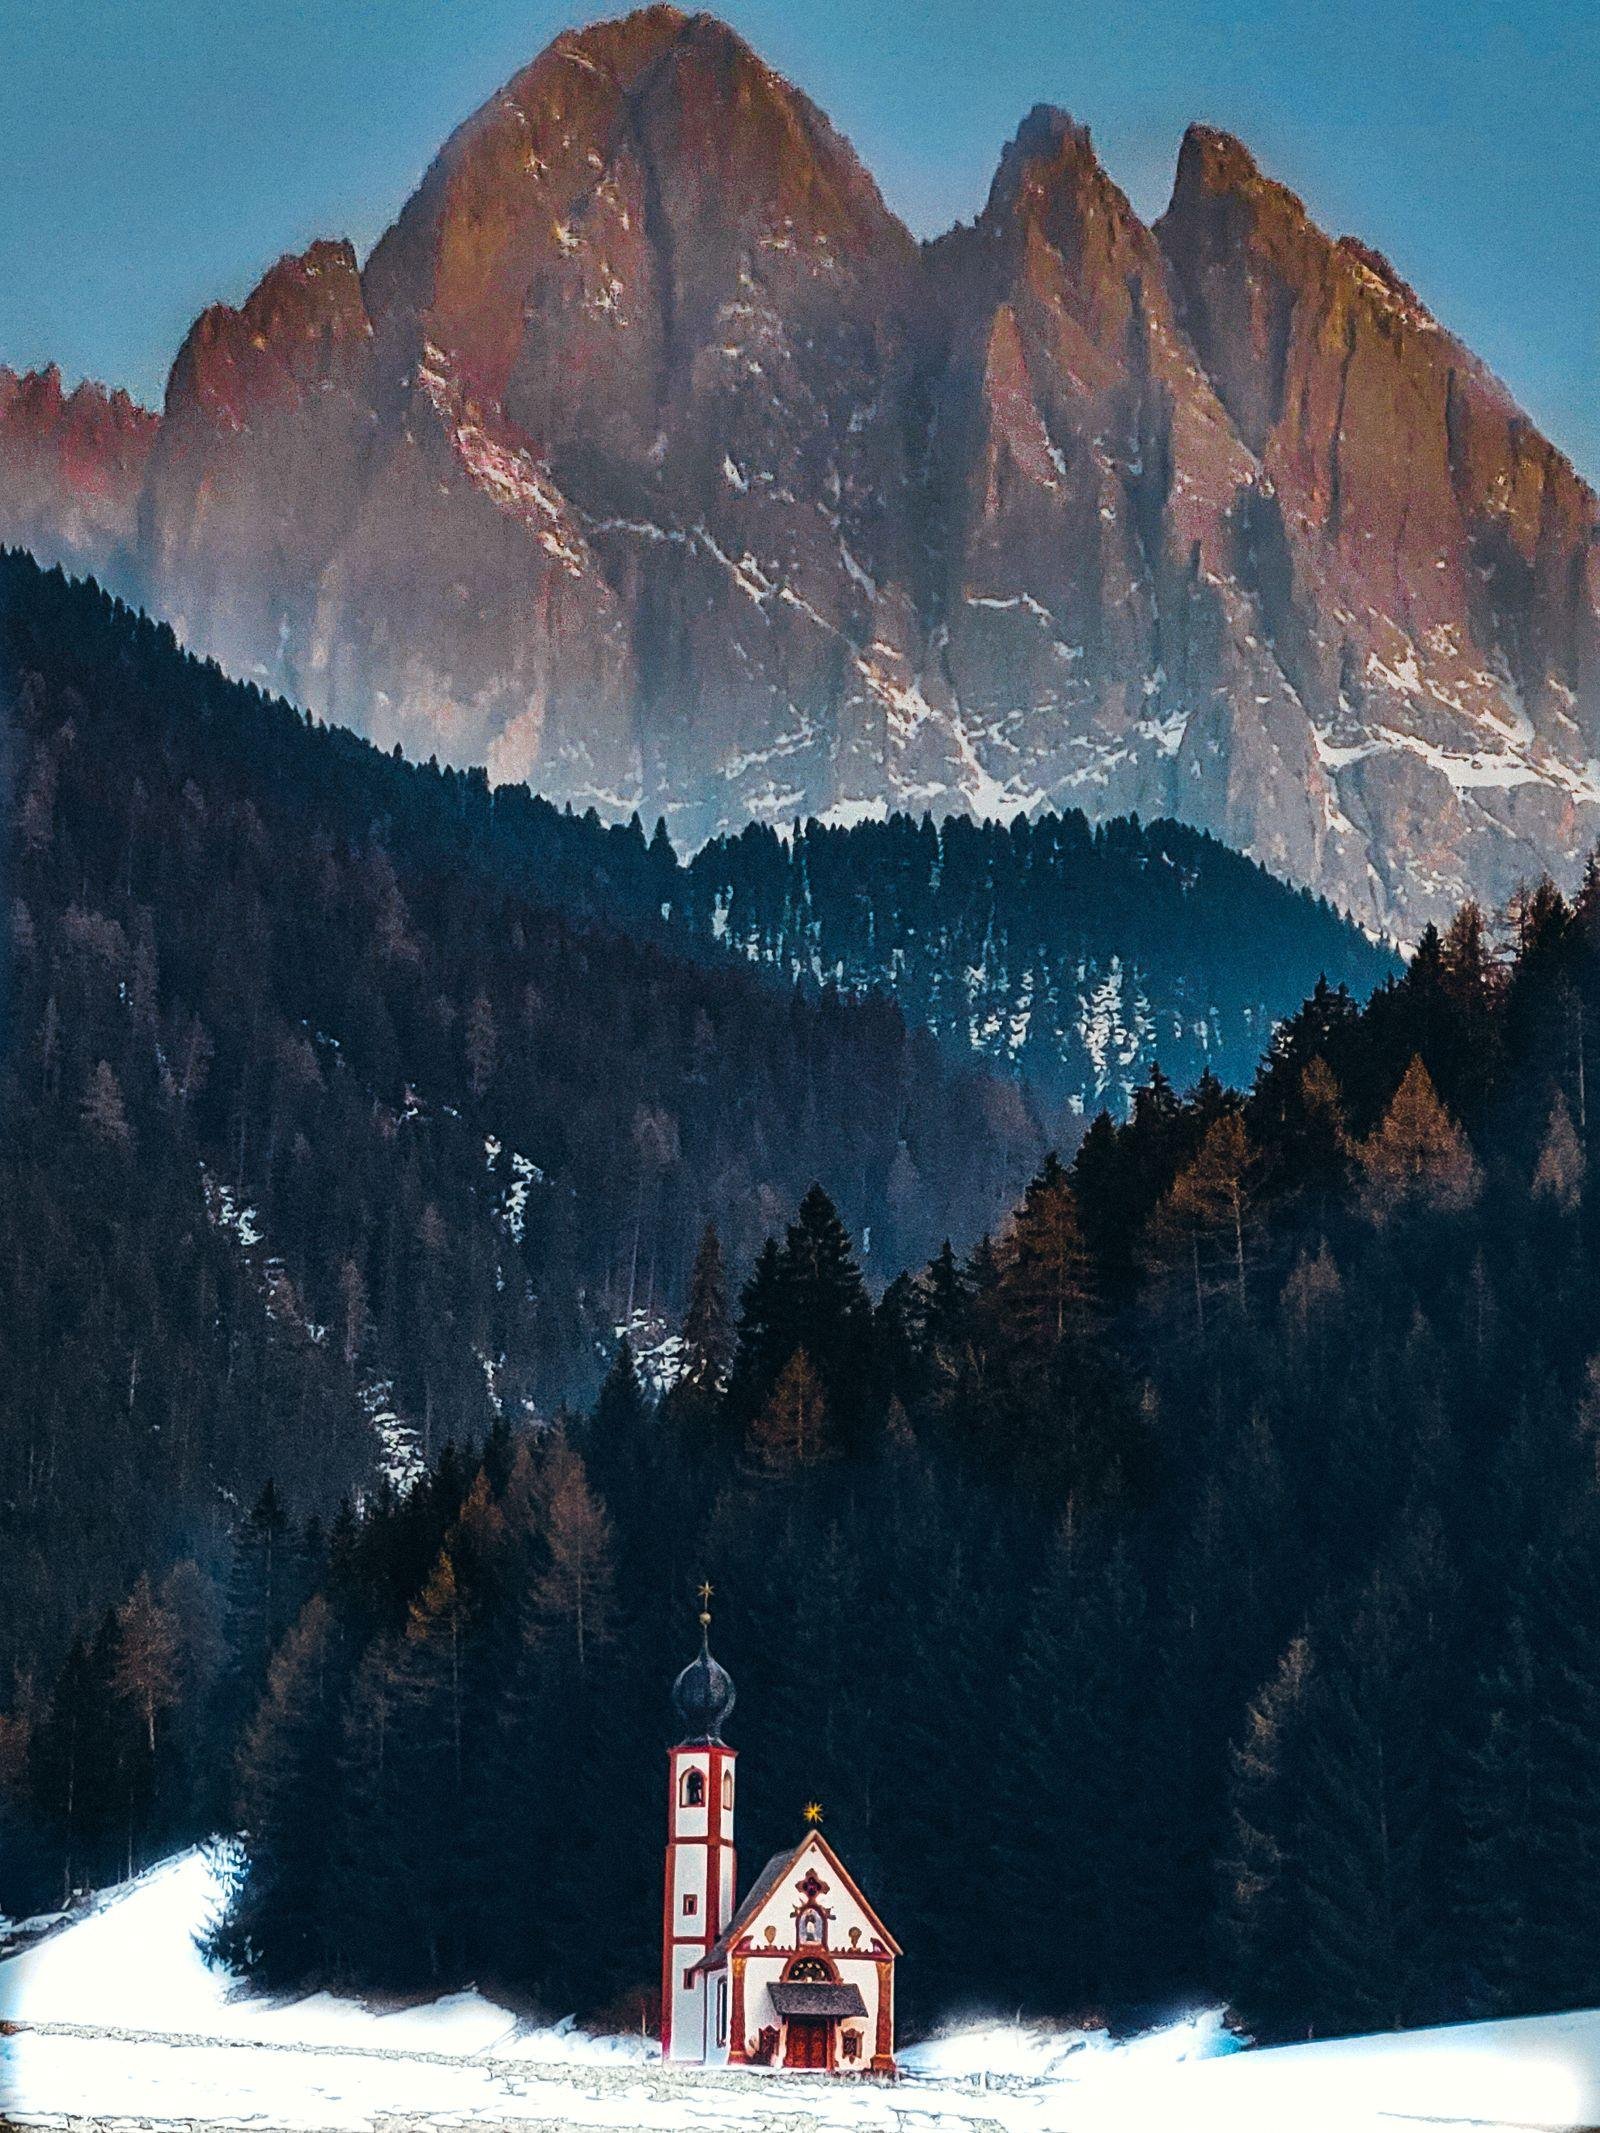 picturesque red and white church in the snow with dark trees behind and jagged mountains in the background glowing red and sunset in val di funes, Italy